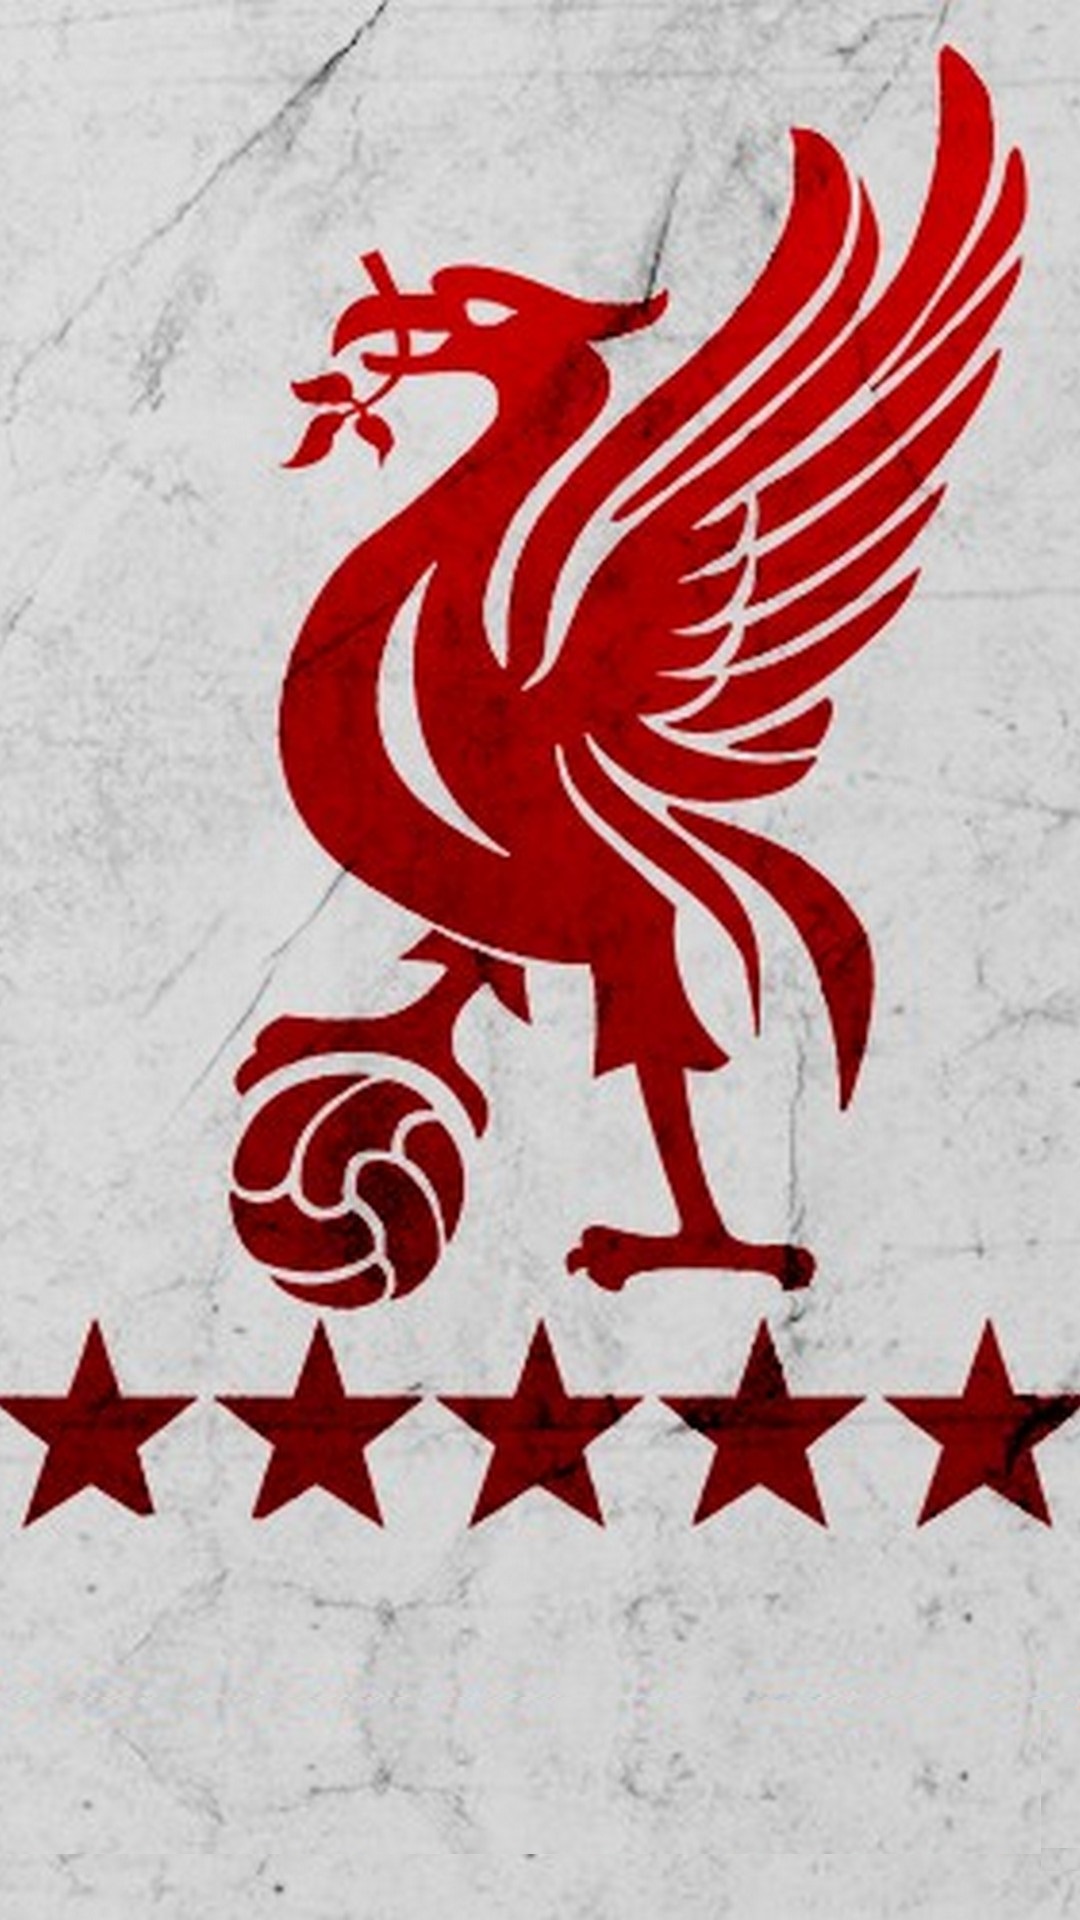 liverpool wallpaper android,illustration,flag,rooster,wing,bird